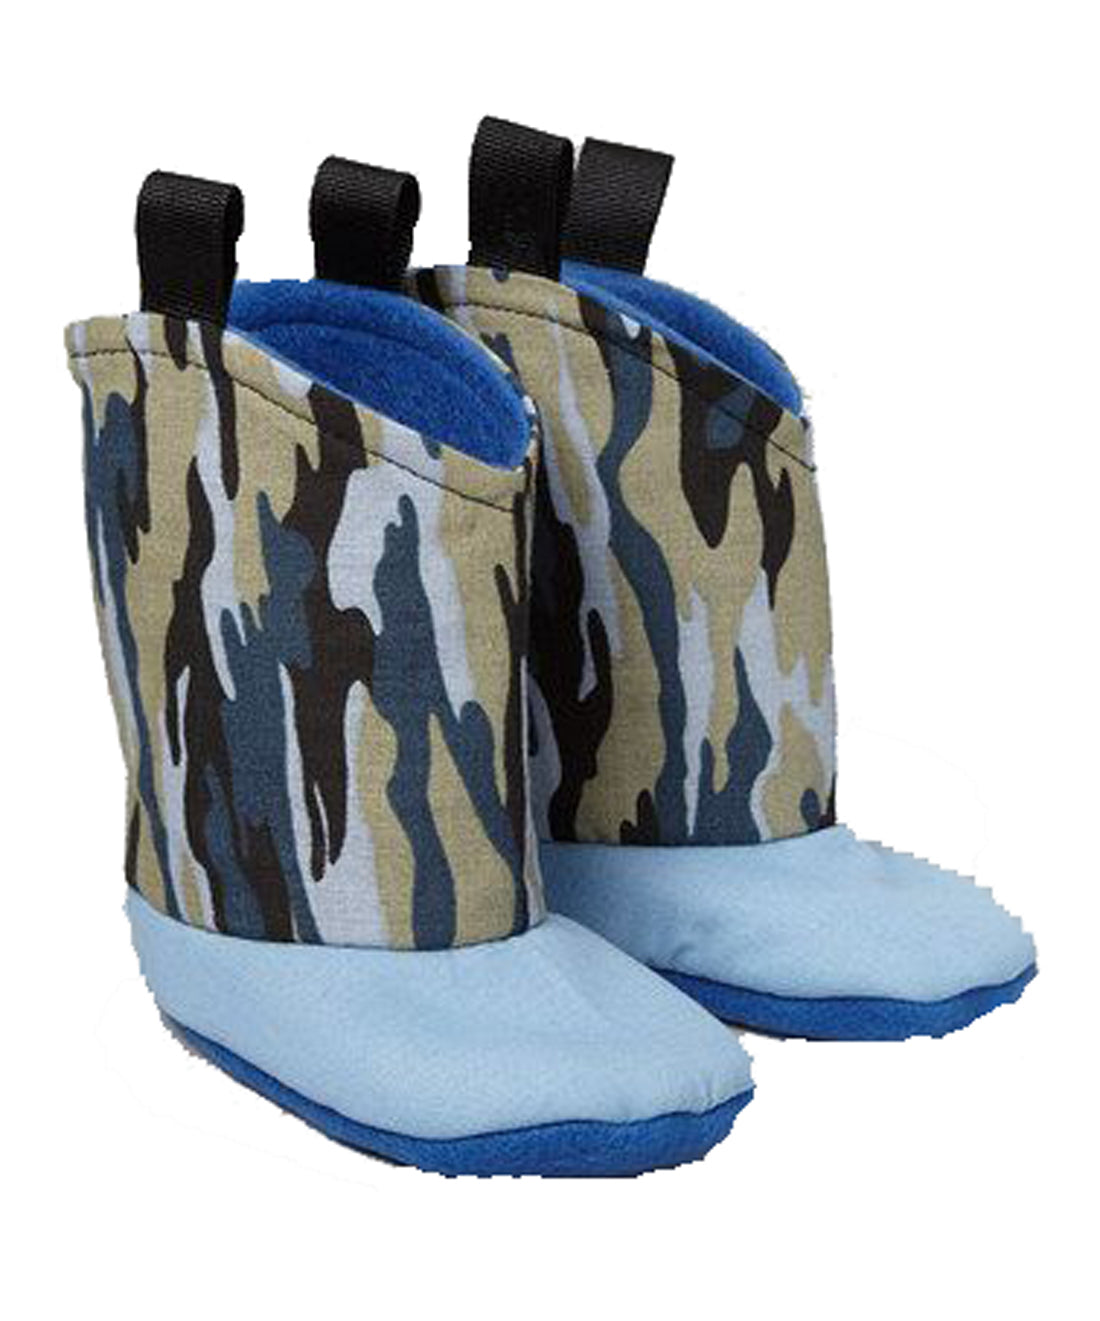 Camo Blue Boots for that little hunter in your life - Western Border and Co